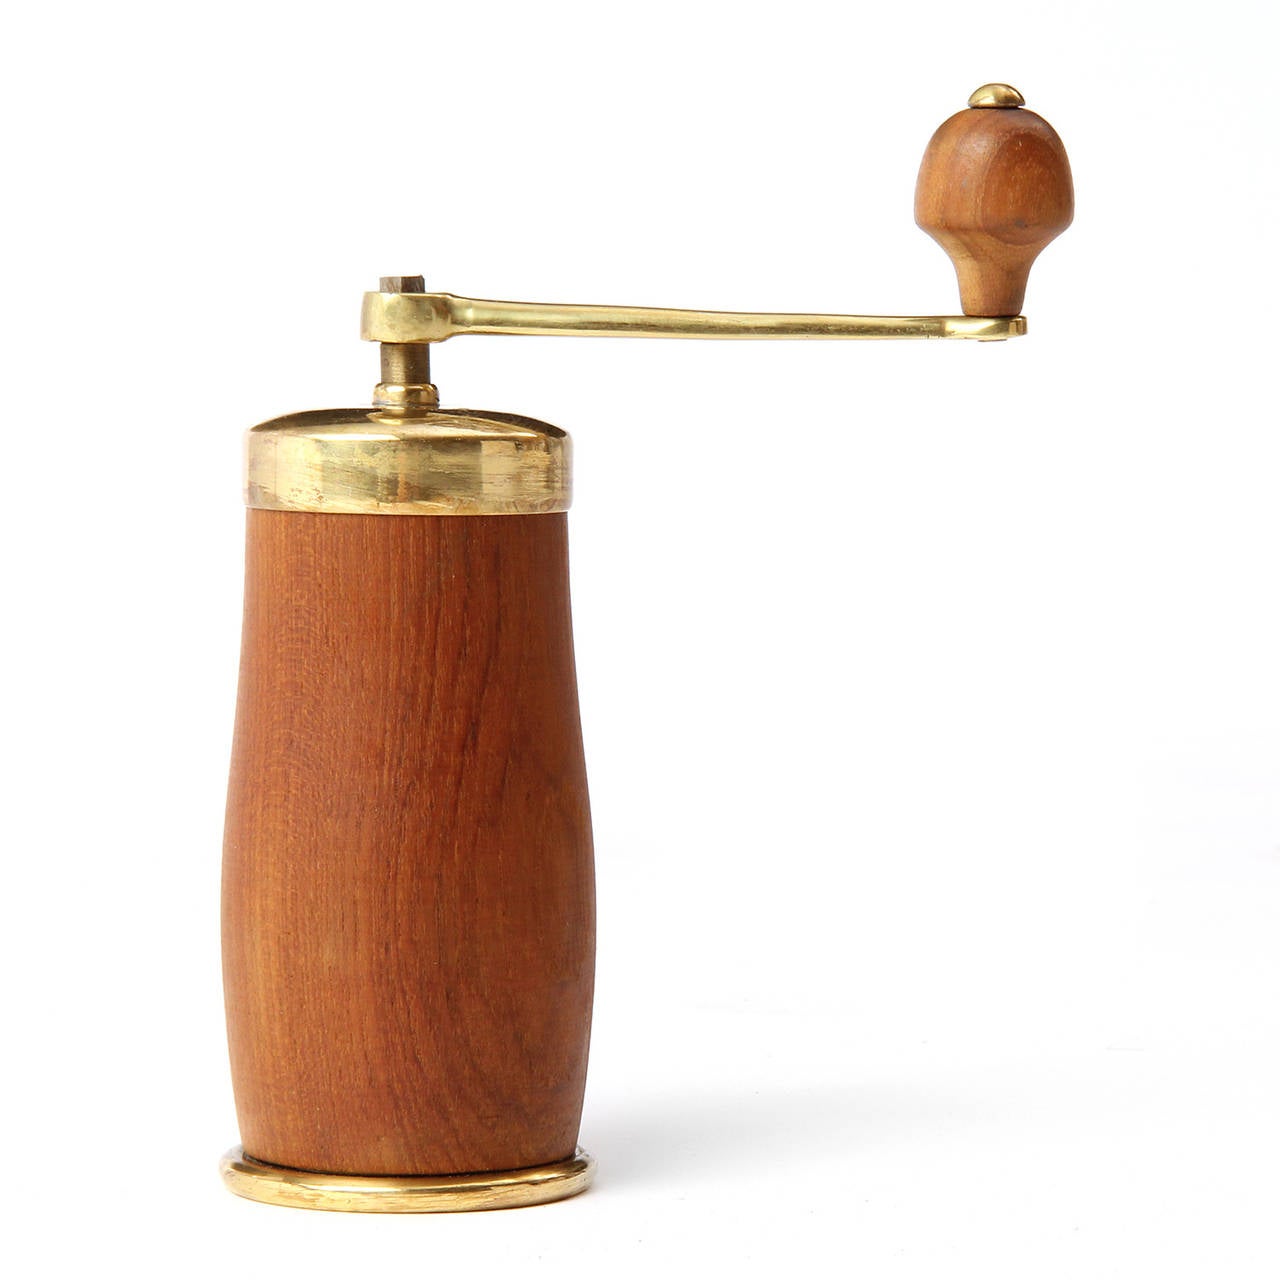 An elegant and sculptural coffee mill crafted of solid teak and lacquered brass.